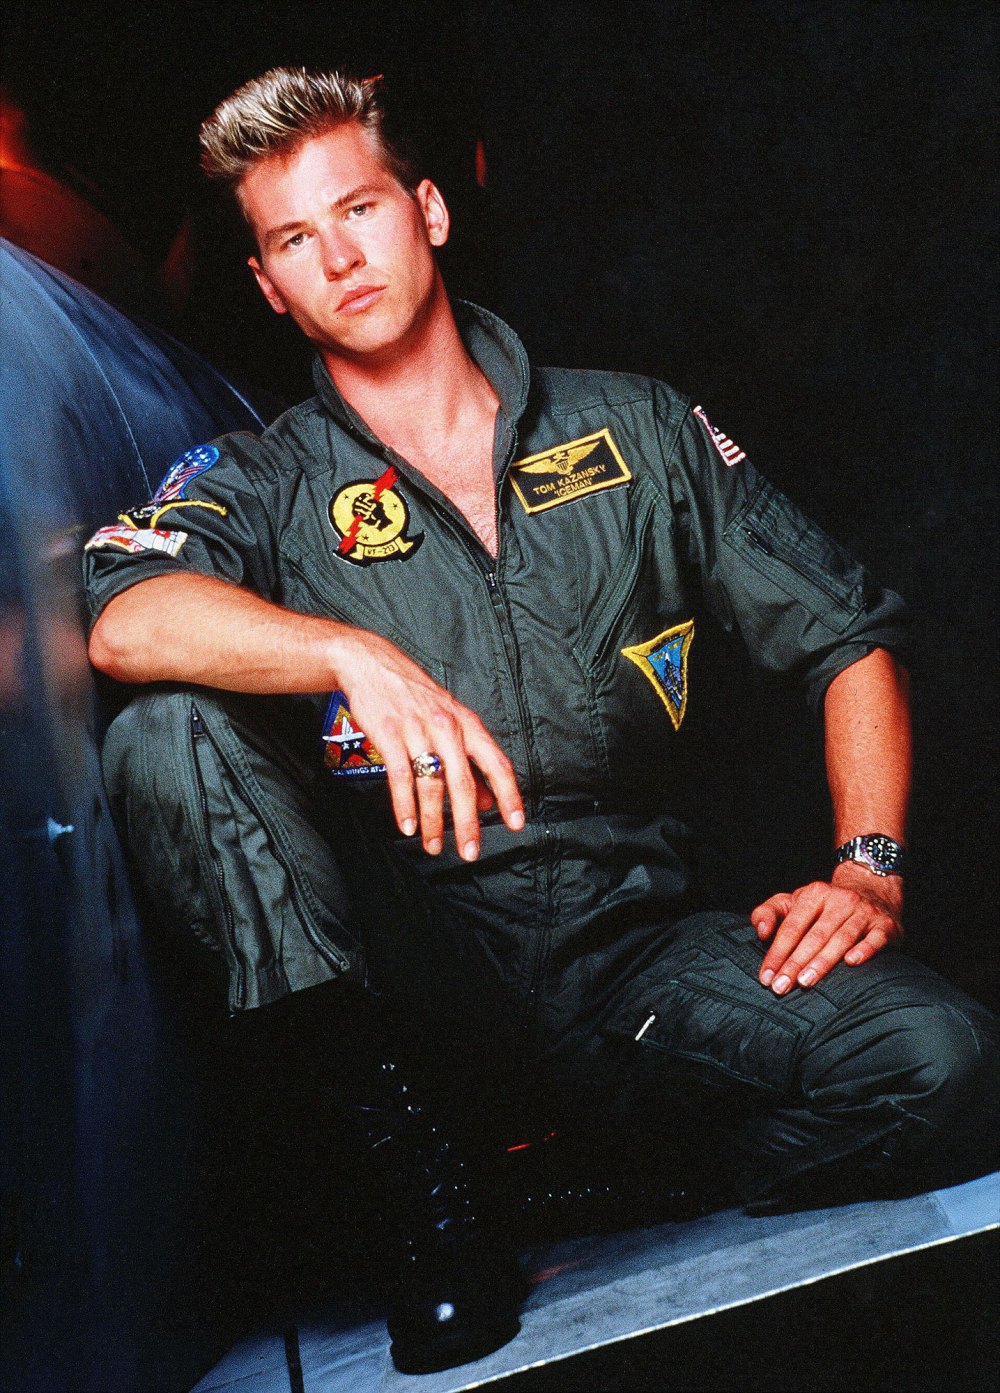 Val Kilmer Says He Was Offered Role in Top Gun 2: “Let’s Fire Up Some Fighter Jets!”